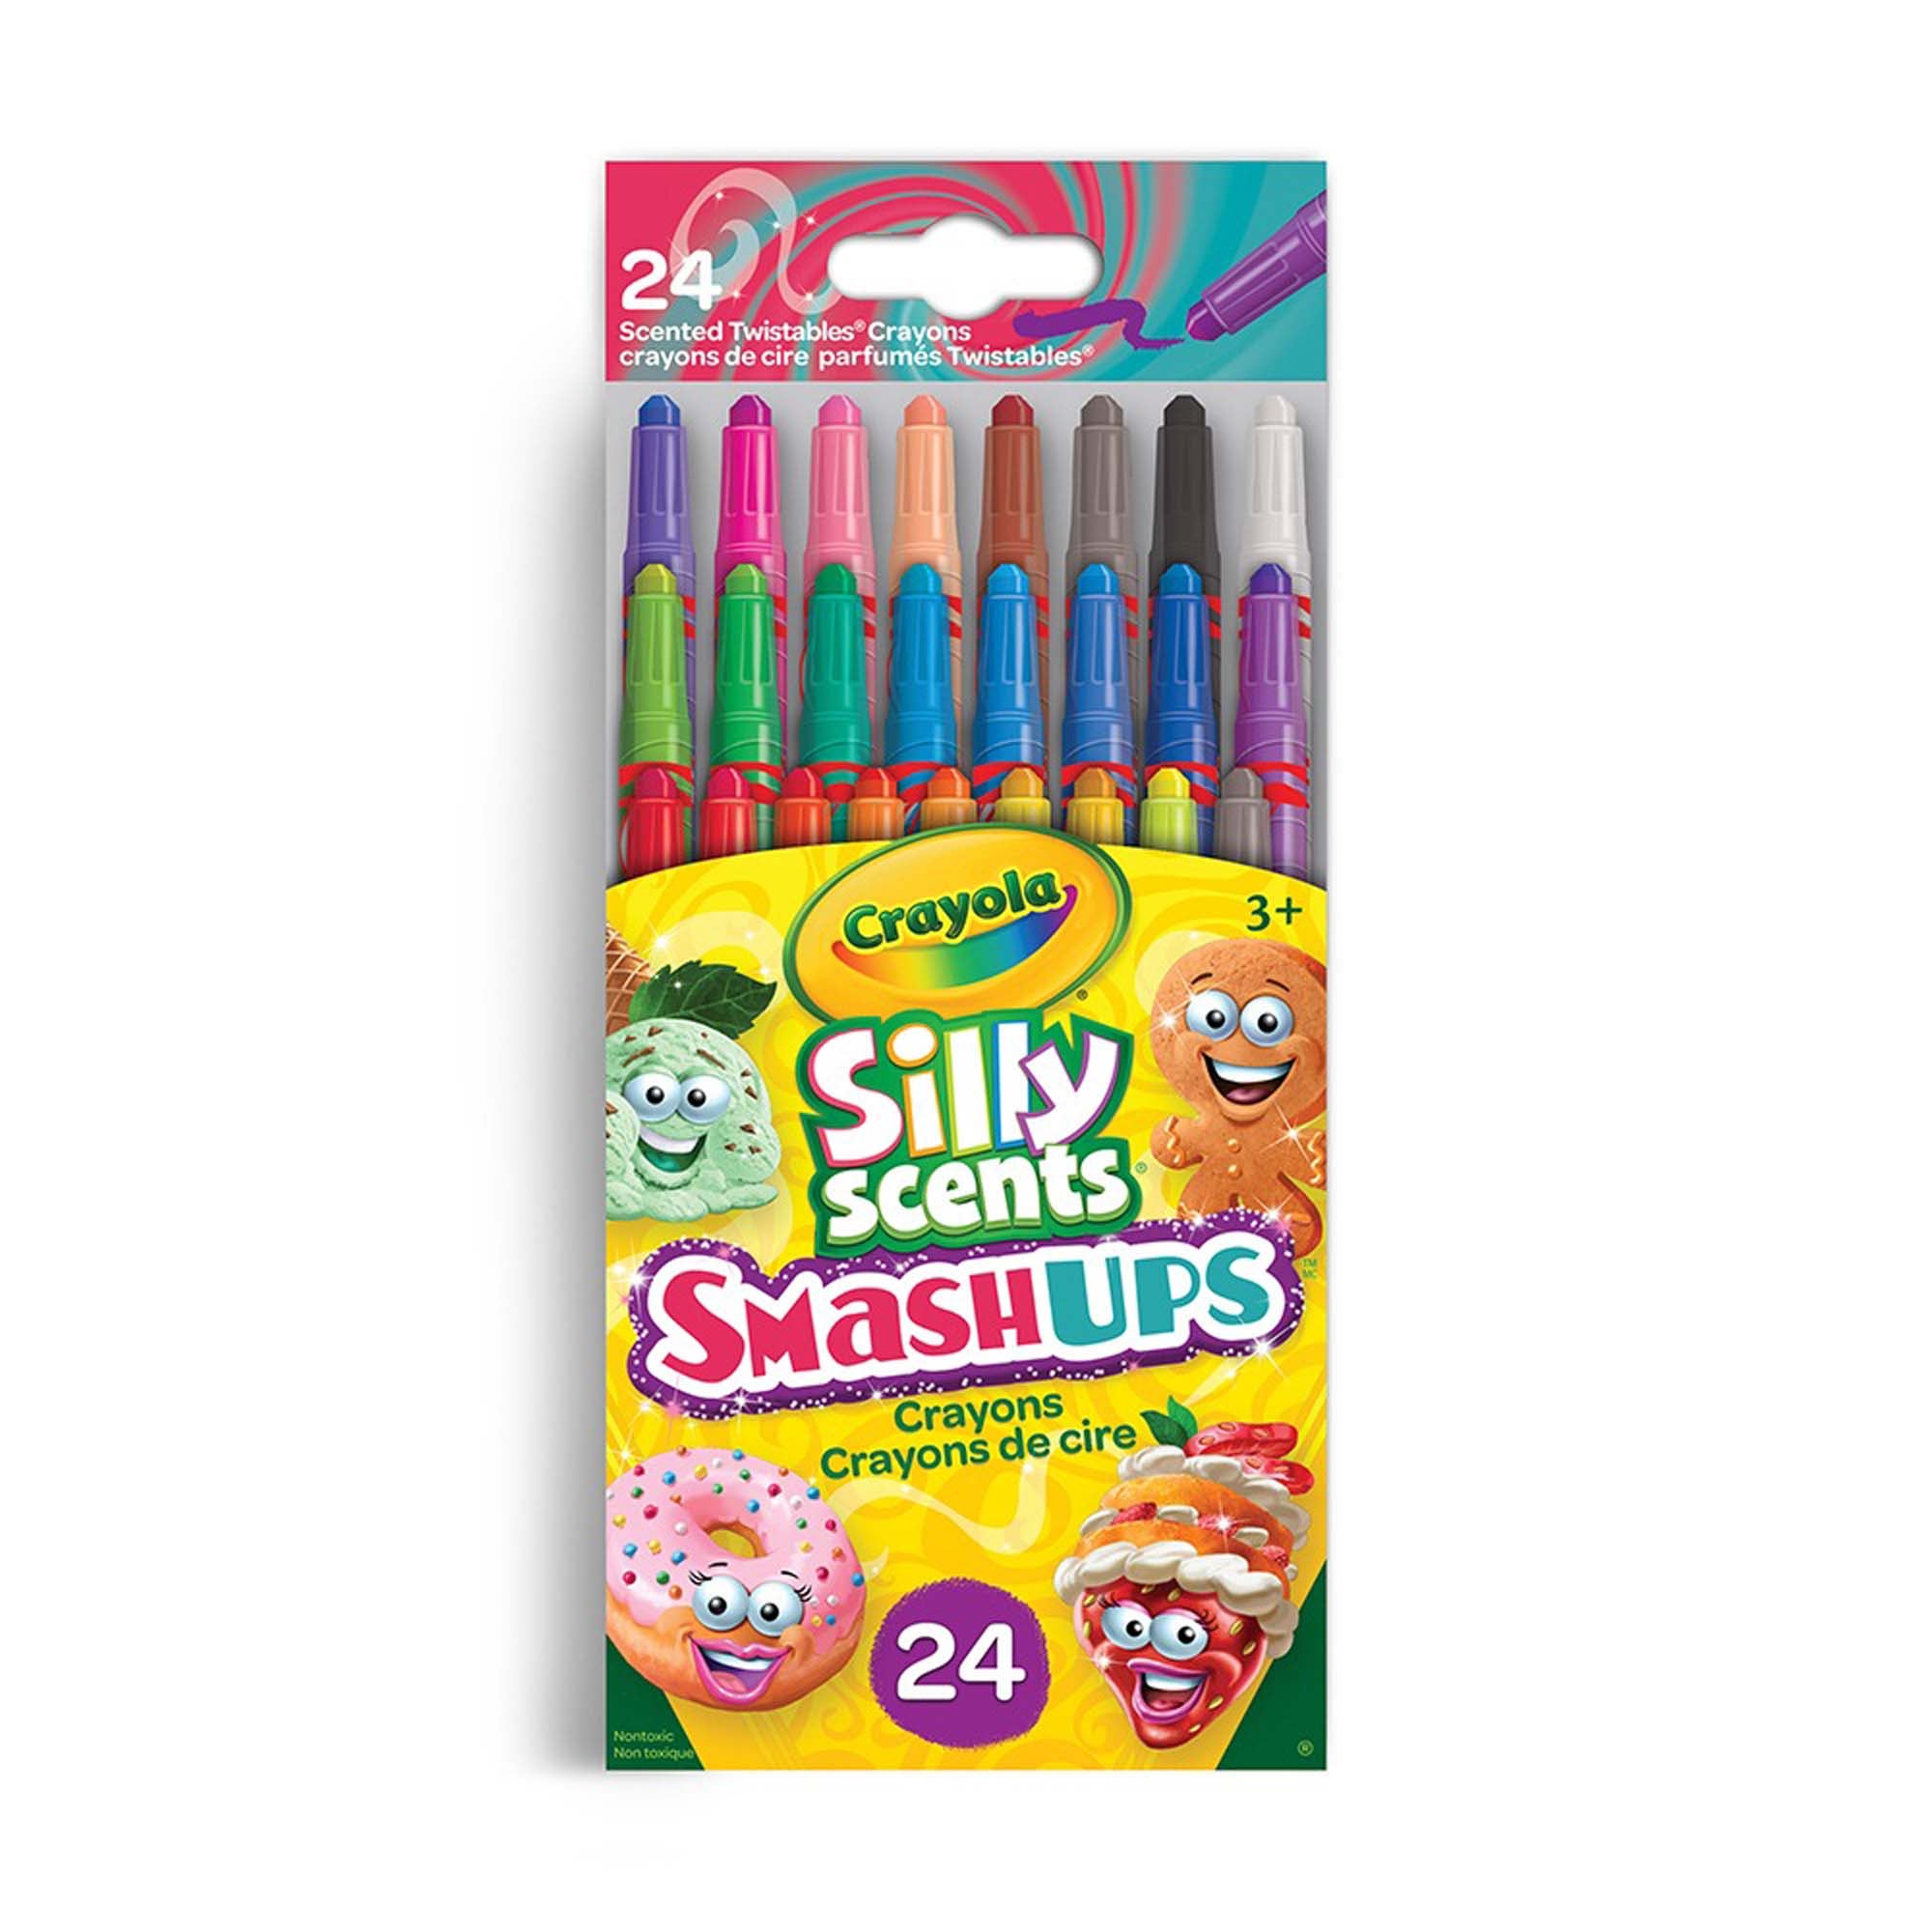 Crayola Silly Scents Smash Ups Twistables Crayons, 24 Count